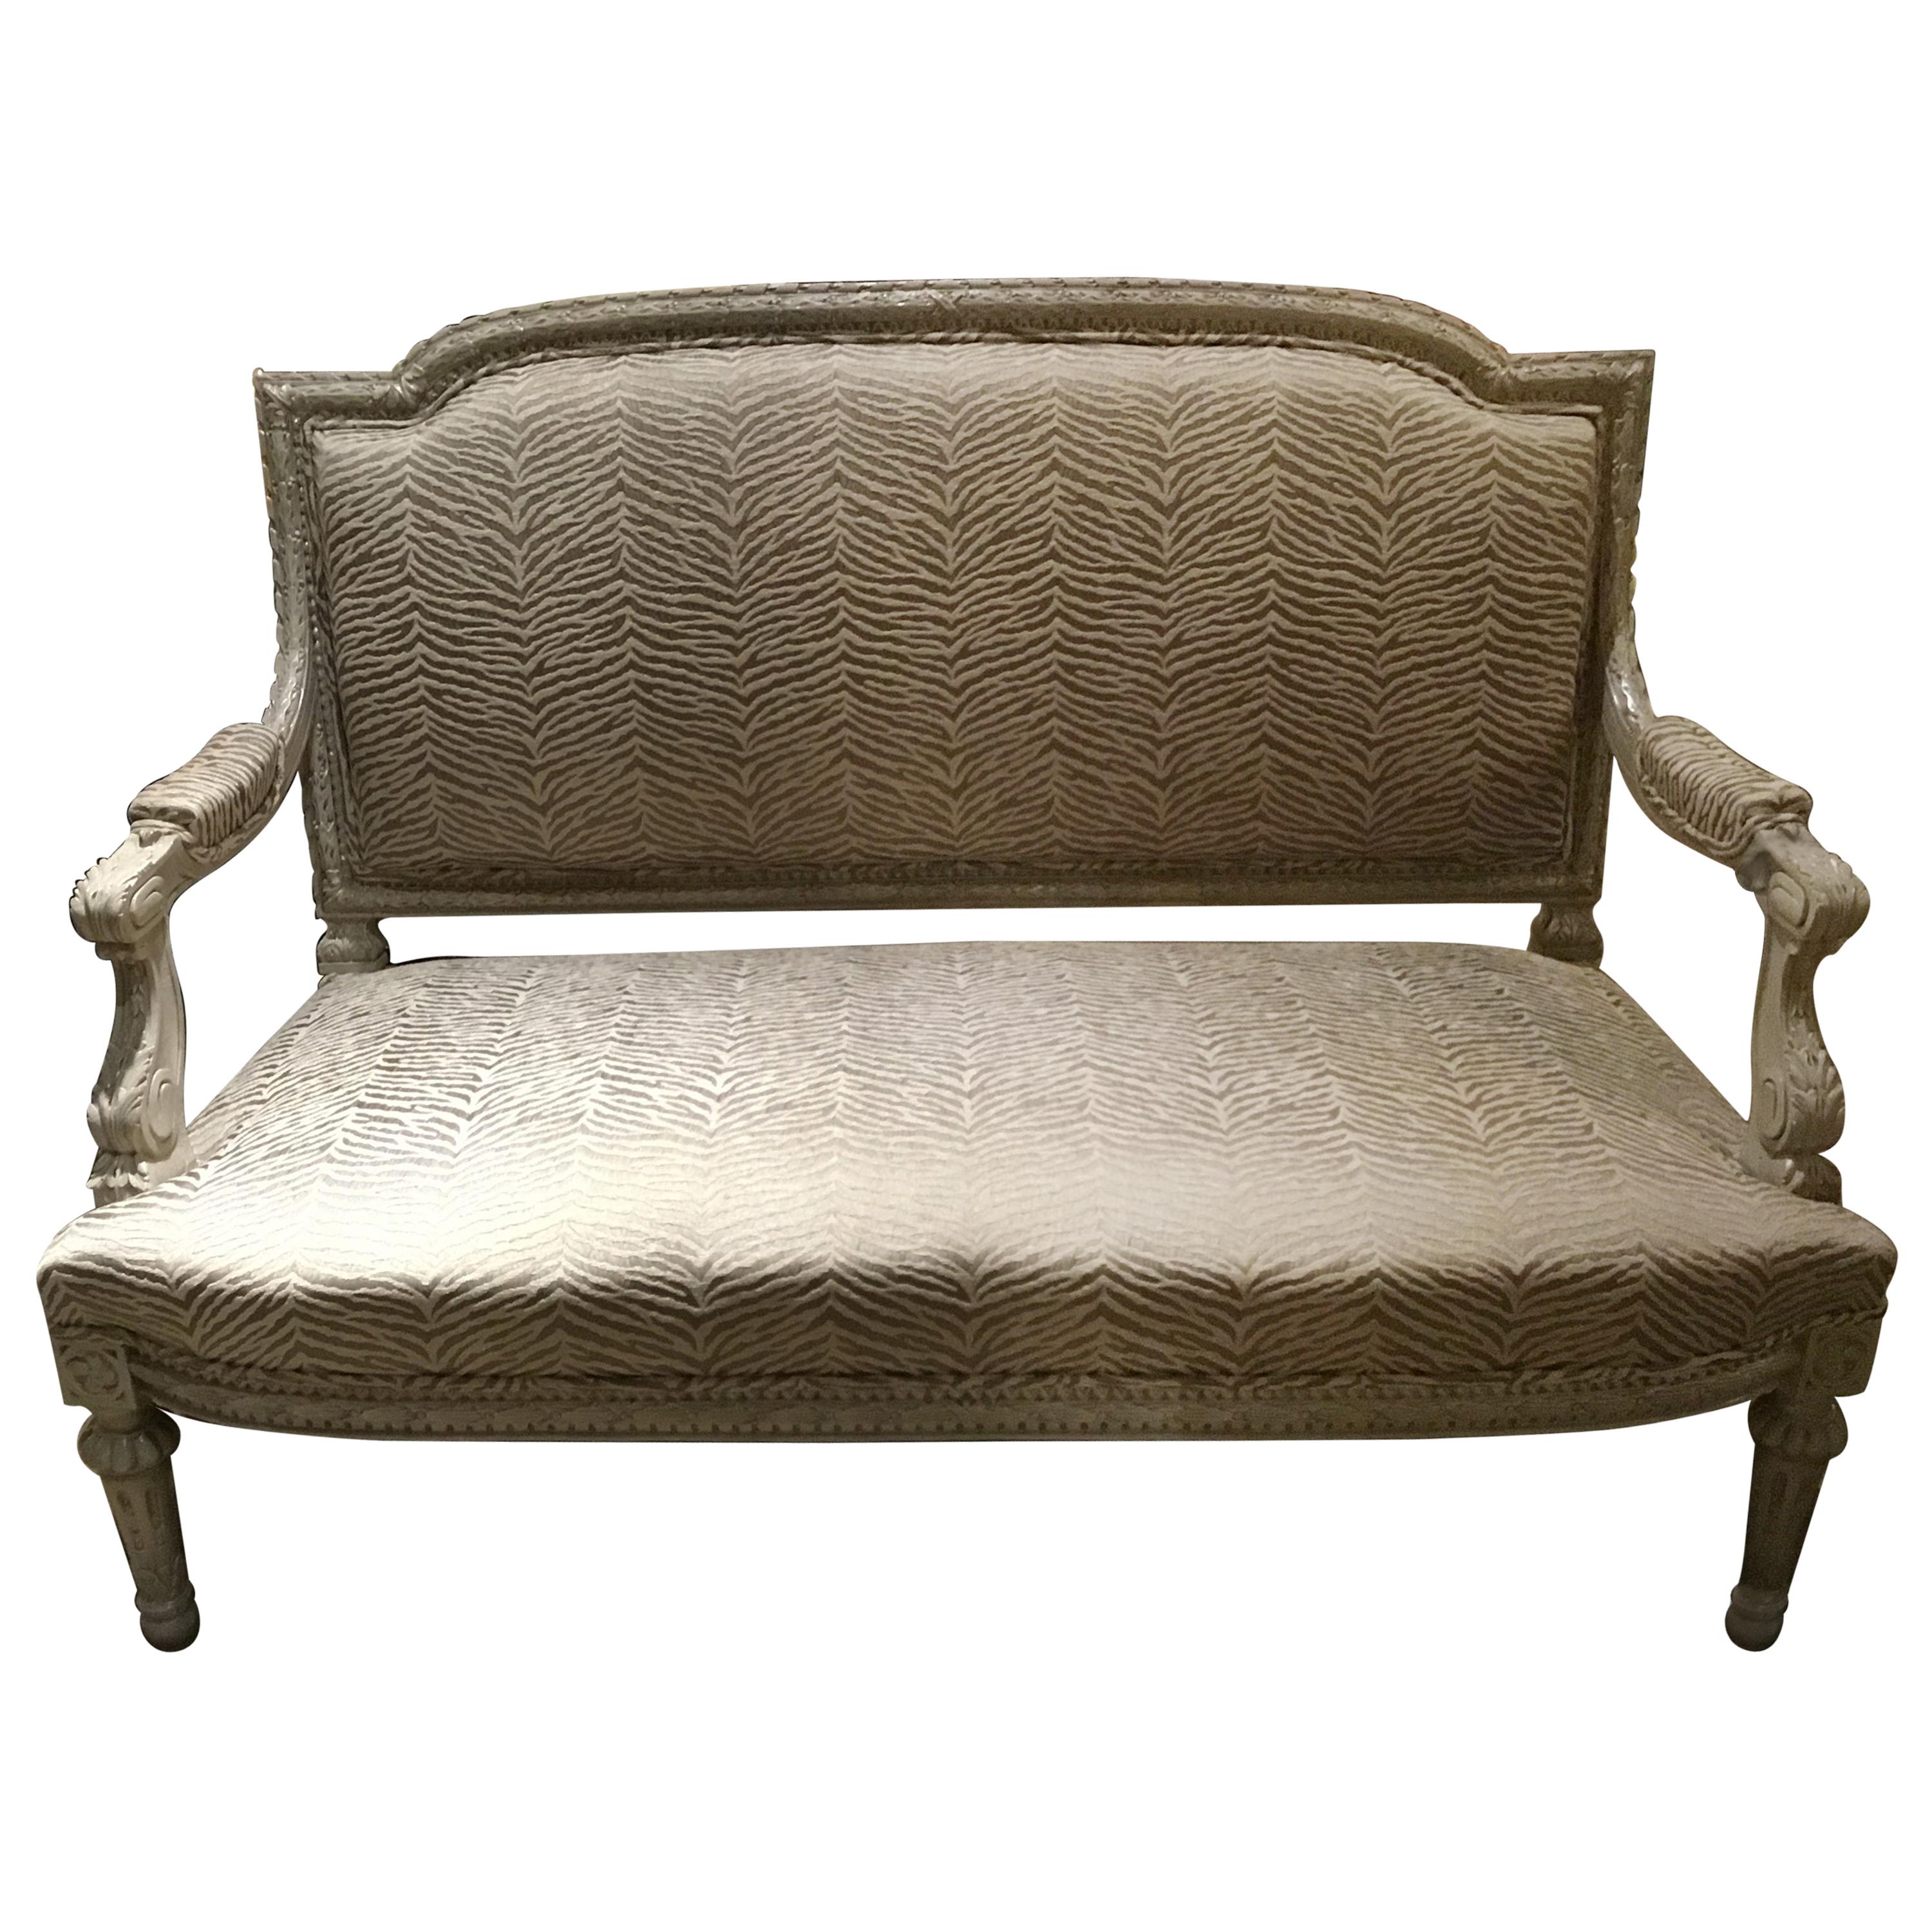 Louis XVI Style Settee/Love Seat, Polychromed with New Upholstery, 19th Century For Sale